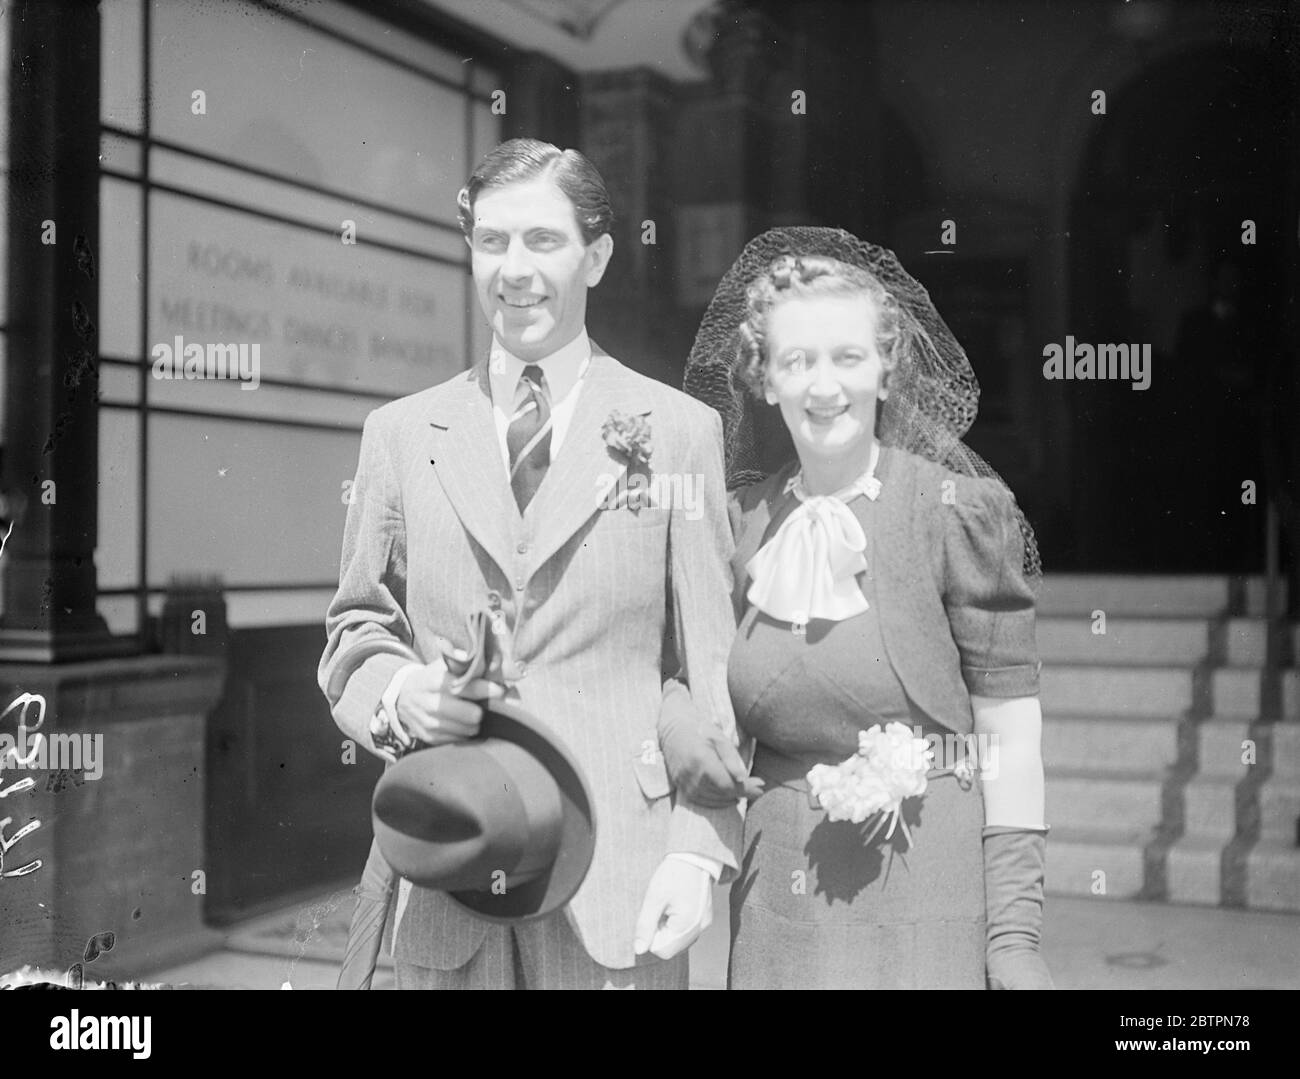 Married in London wedding rush. Captain A. S. T. Godfrey, Royal Engineers, and Miss Muriel Abrahams, daughter of Major and Mrs A. C. Abrahams, who were married at Caxon Hall Register Office during the London rush of weddings which coincided with the wedding of the Duke and Duchess of Windsor. Photo shows: captain A. S. T. Godfrey and his bride leaving Caxon Hall after their marriage. 3 June 1937 Stock Photo